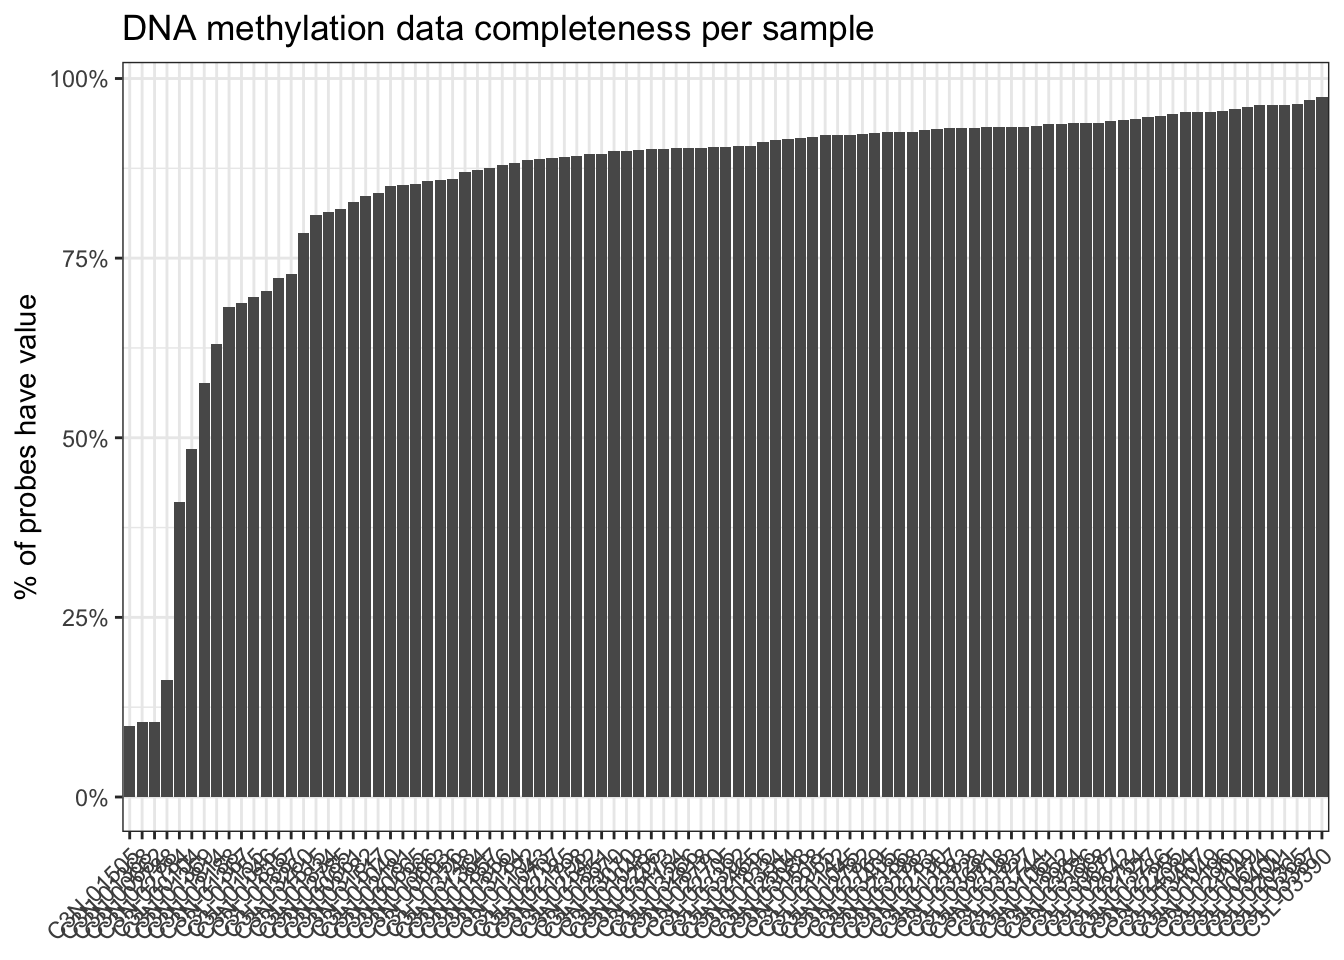 Bar plot of the percentage of the DNA methylation probes with measurements per sample in the cohort.